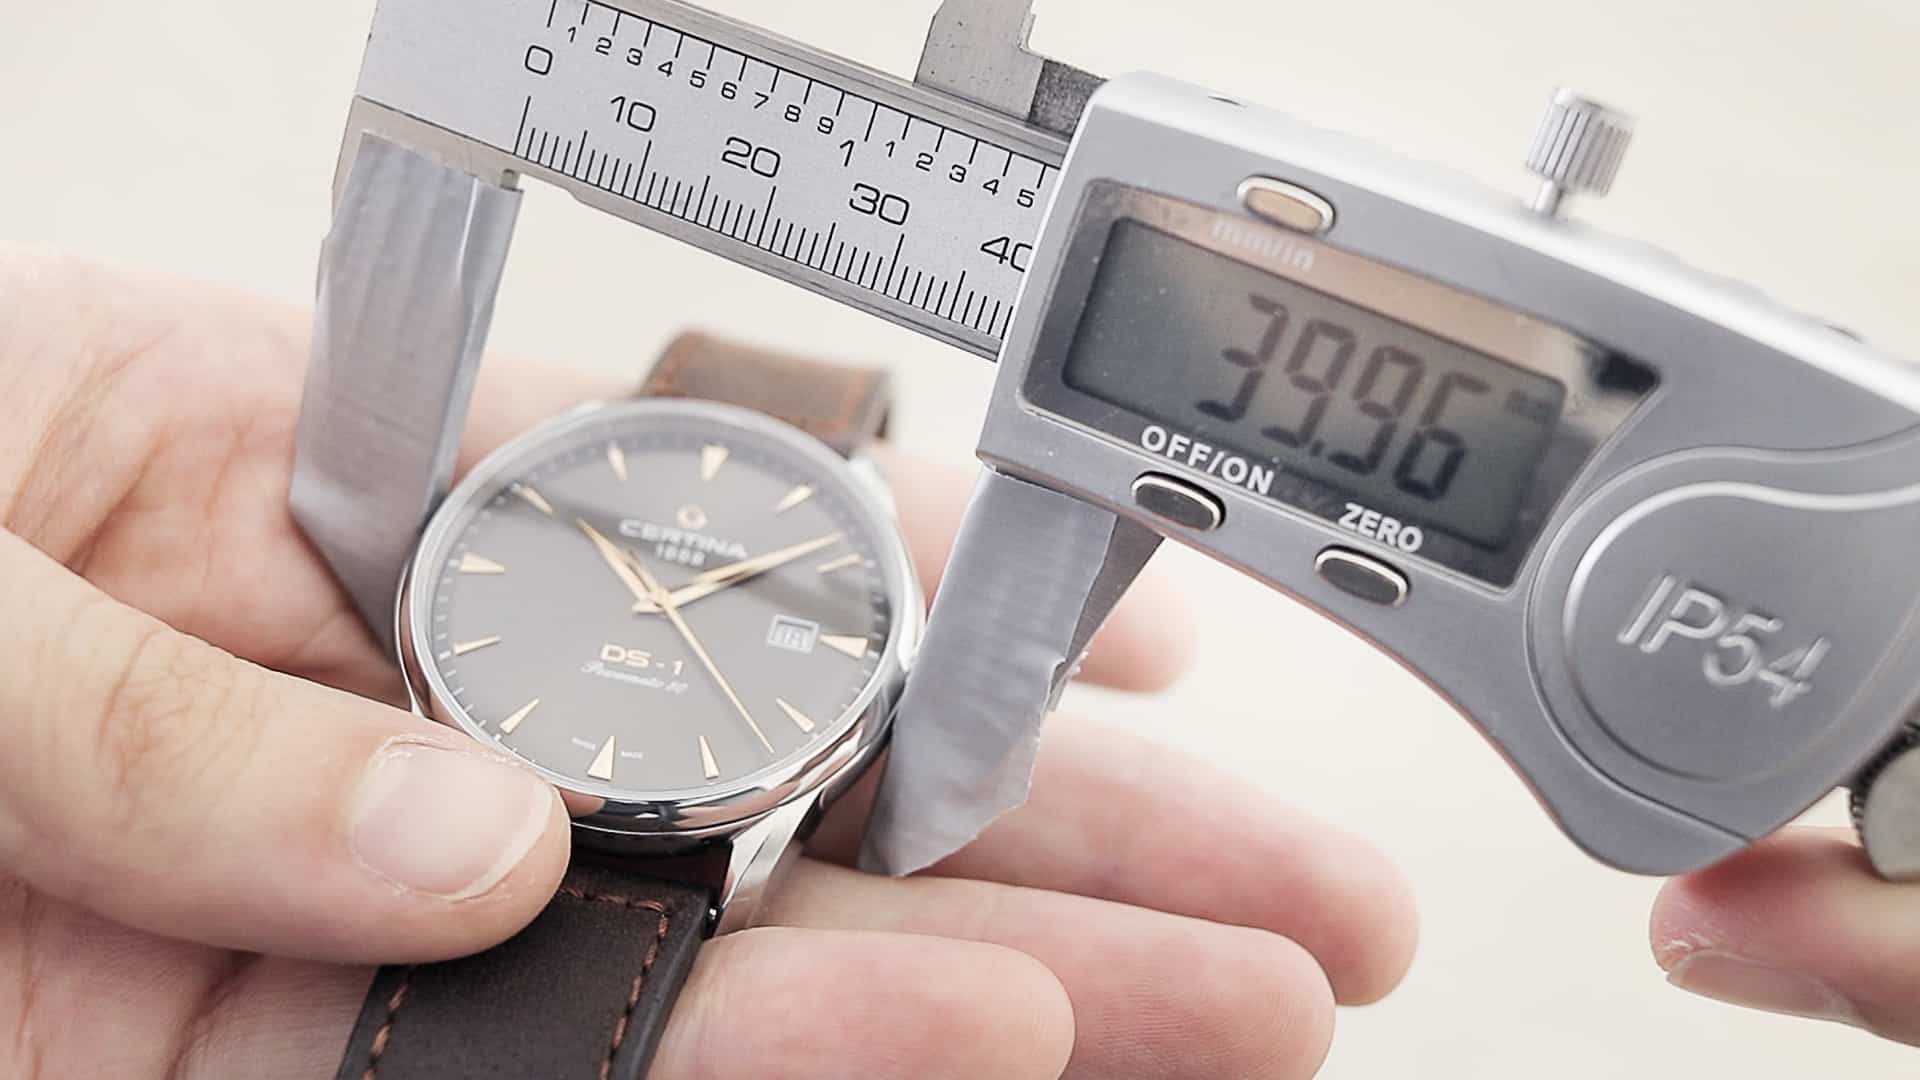 watch case size calipers